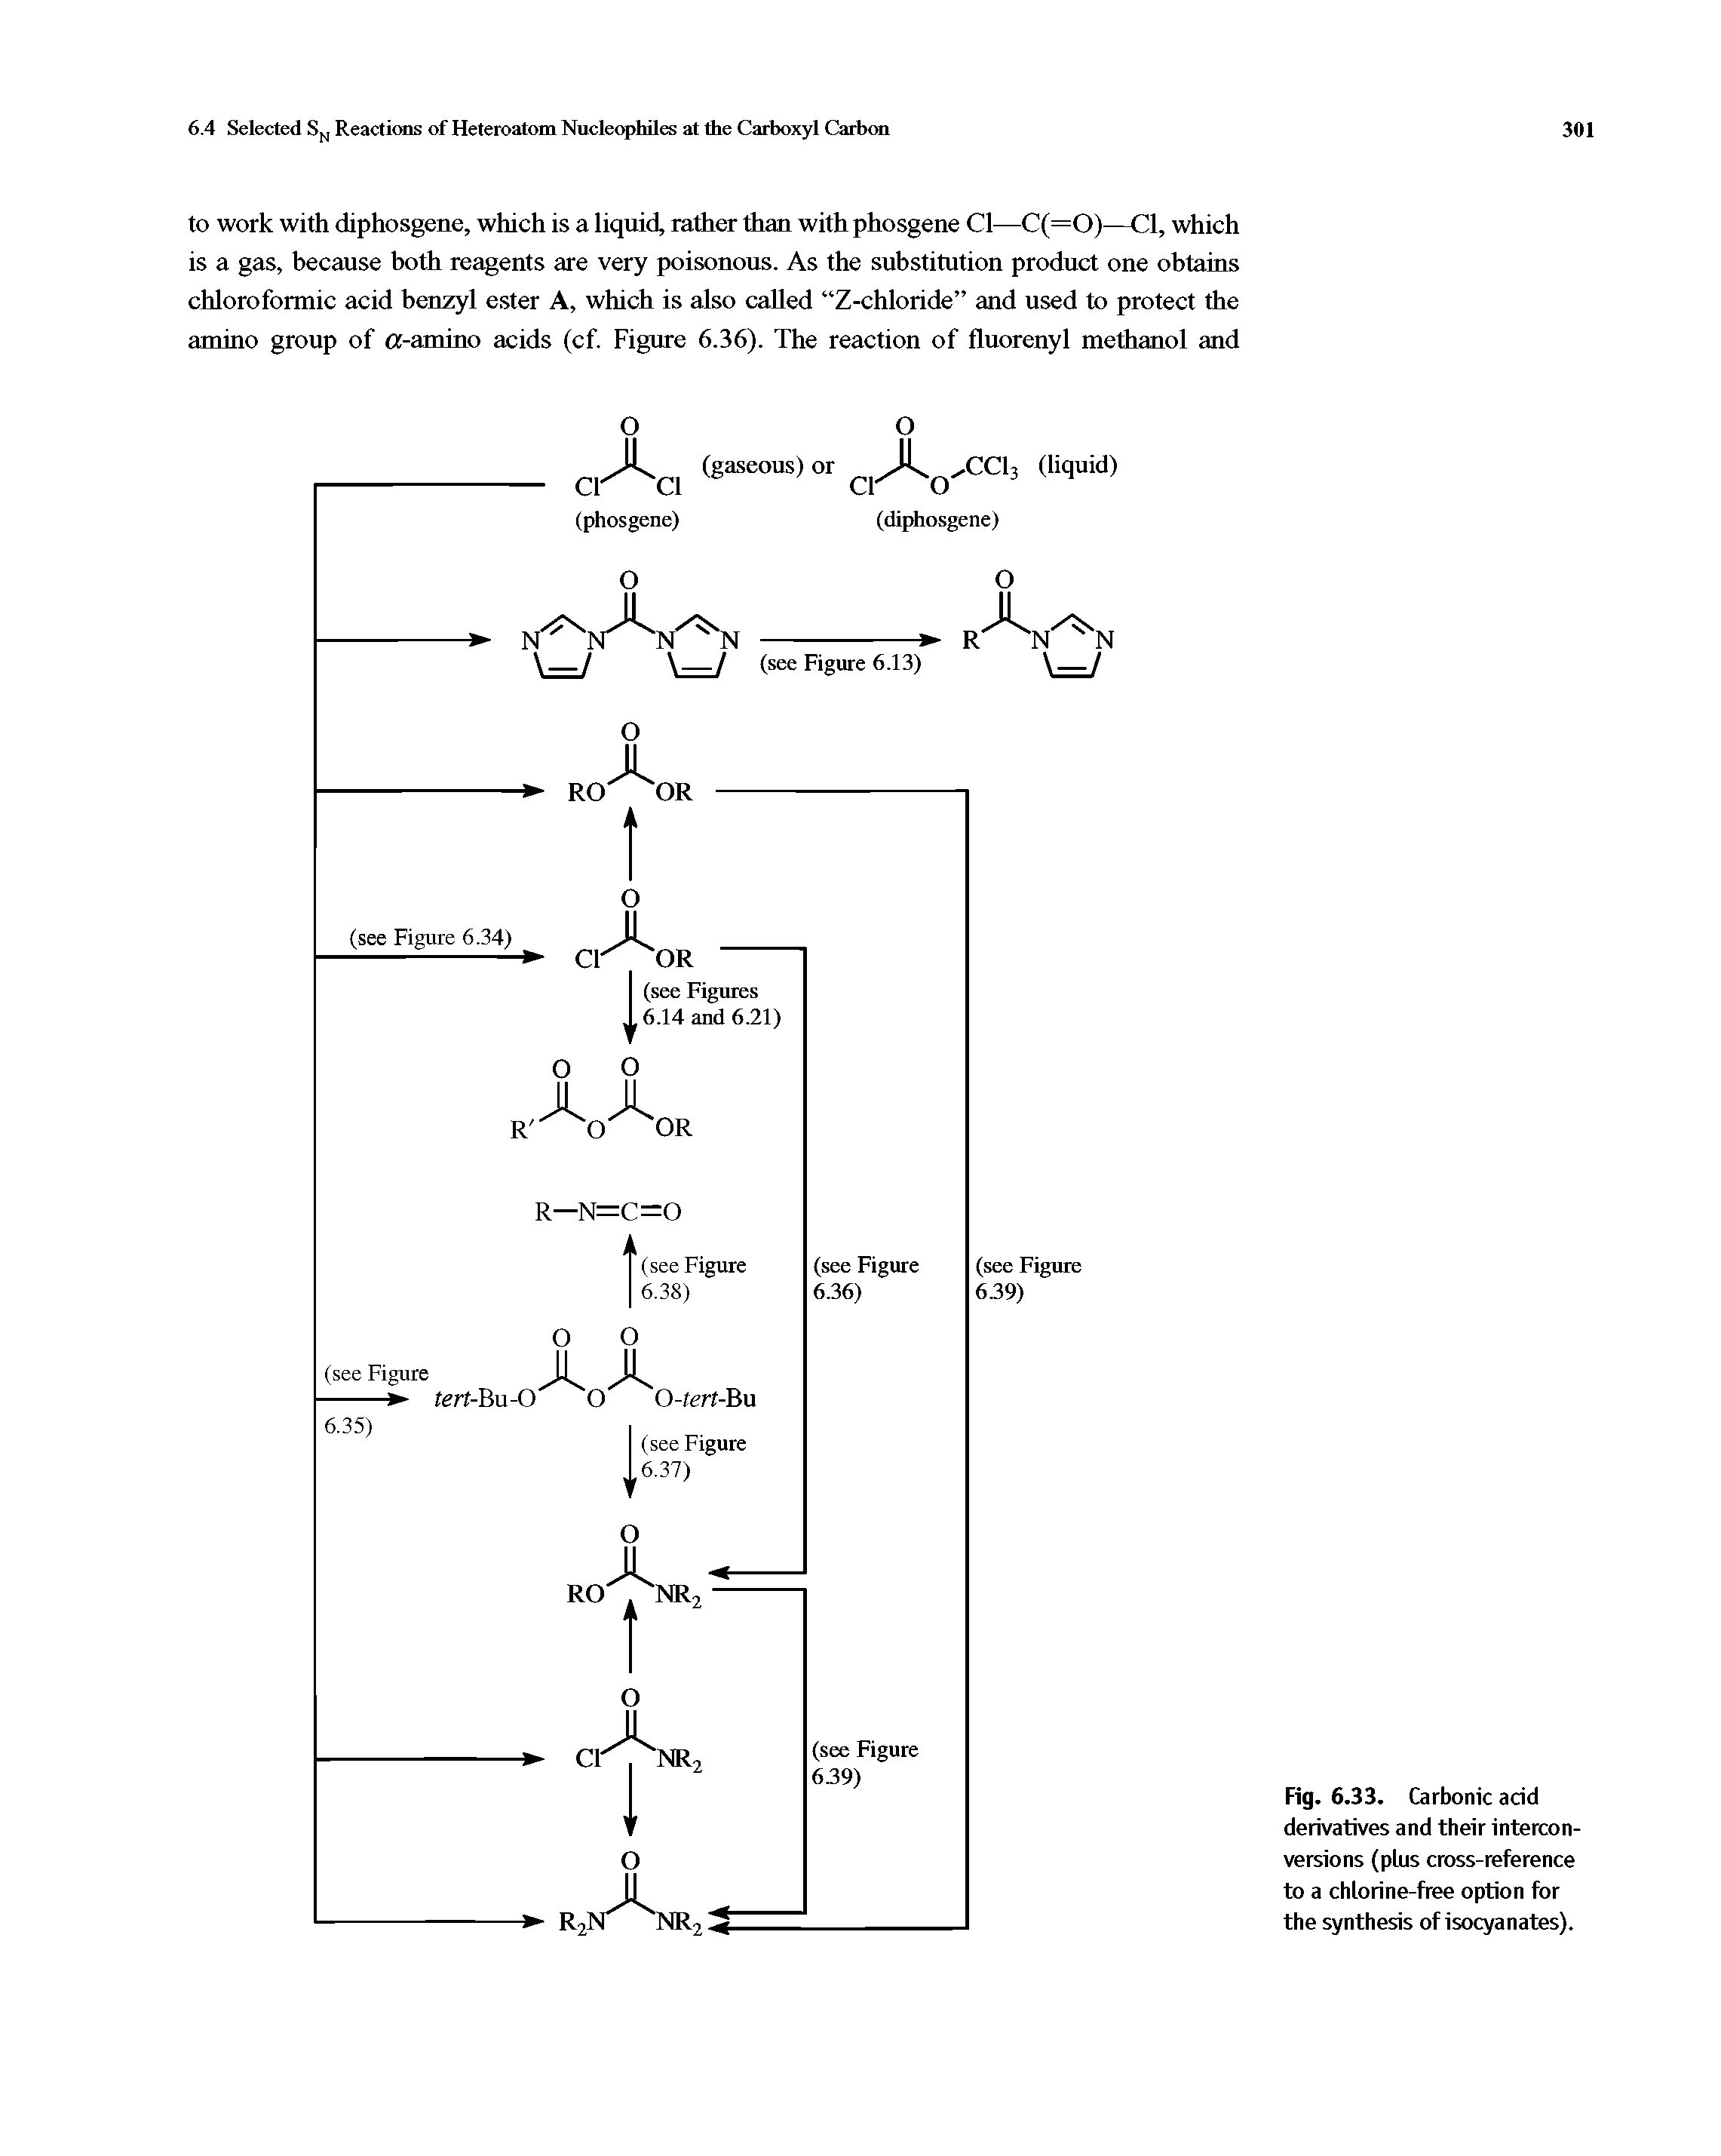 Fig. 6. 33. Carbonic acid derivatives and their interconversions (plus cross-reference to a chlorine-free option for the synthesis of isocyanates).